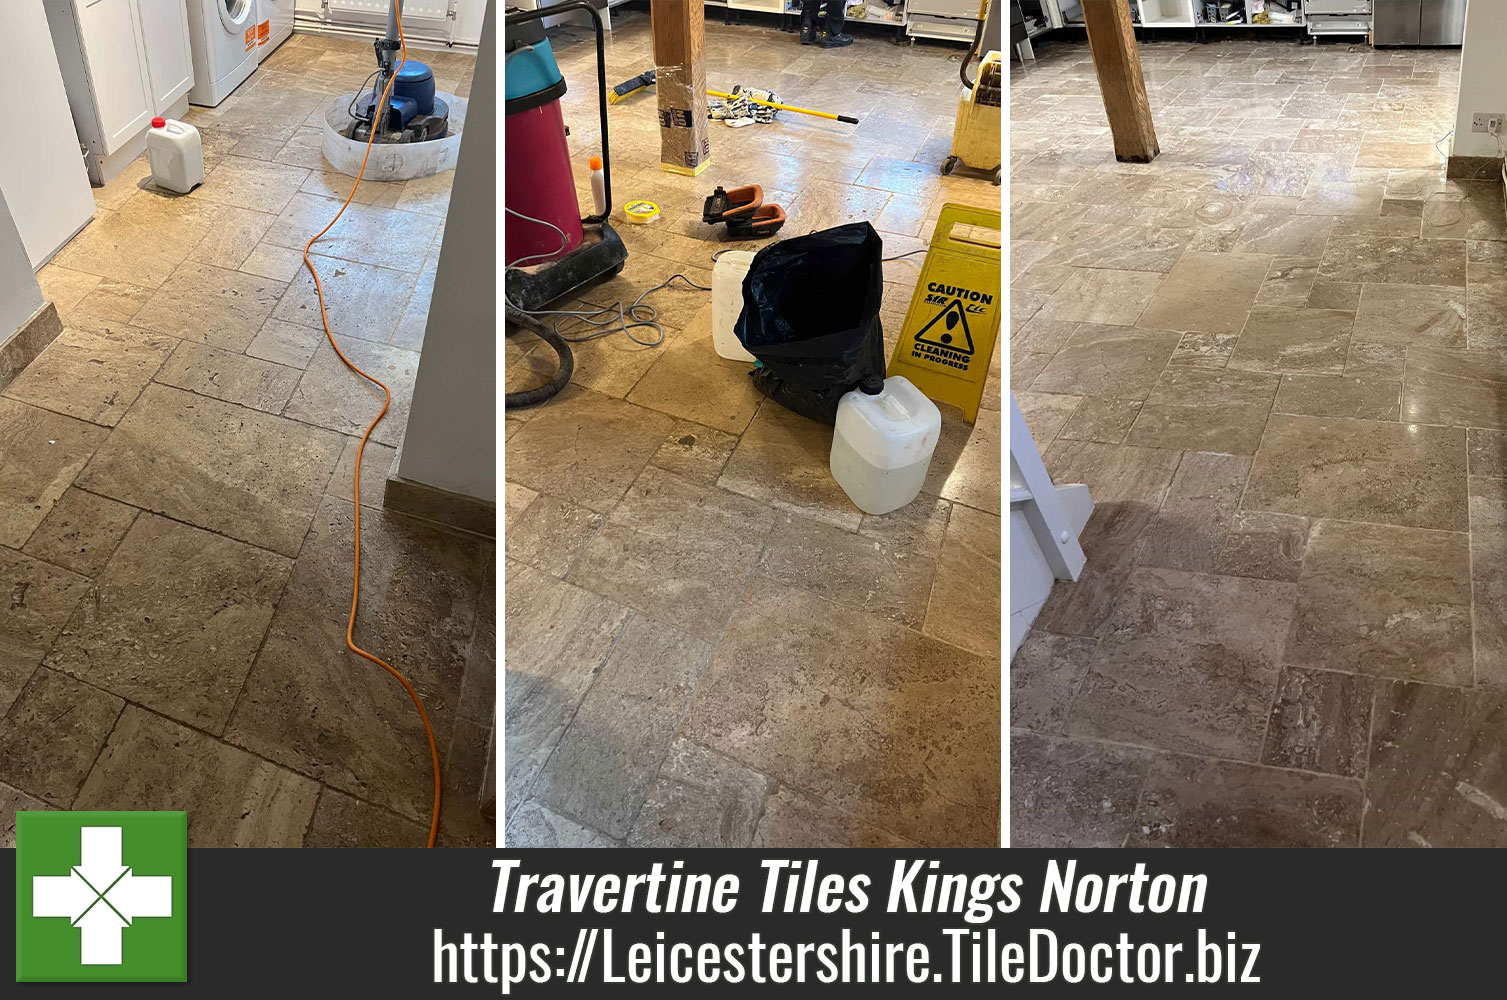 Travertine-Kitchen-Floor-Before-After-Refinishing-Kings-Norton-Leicester